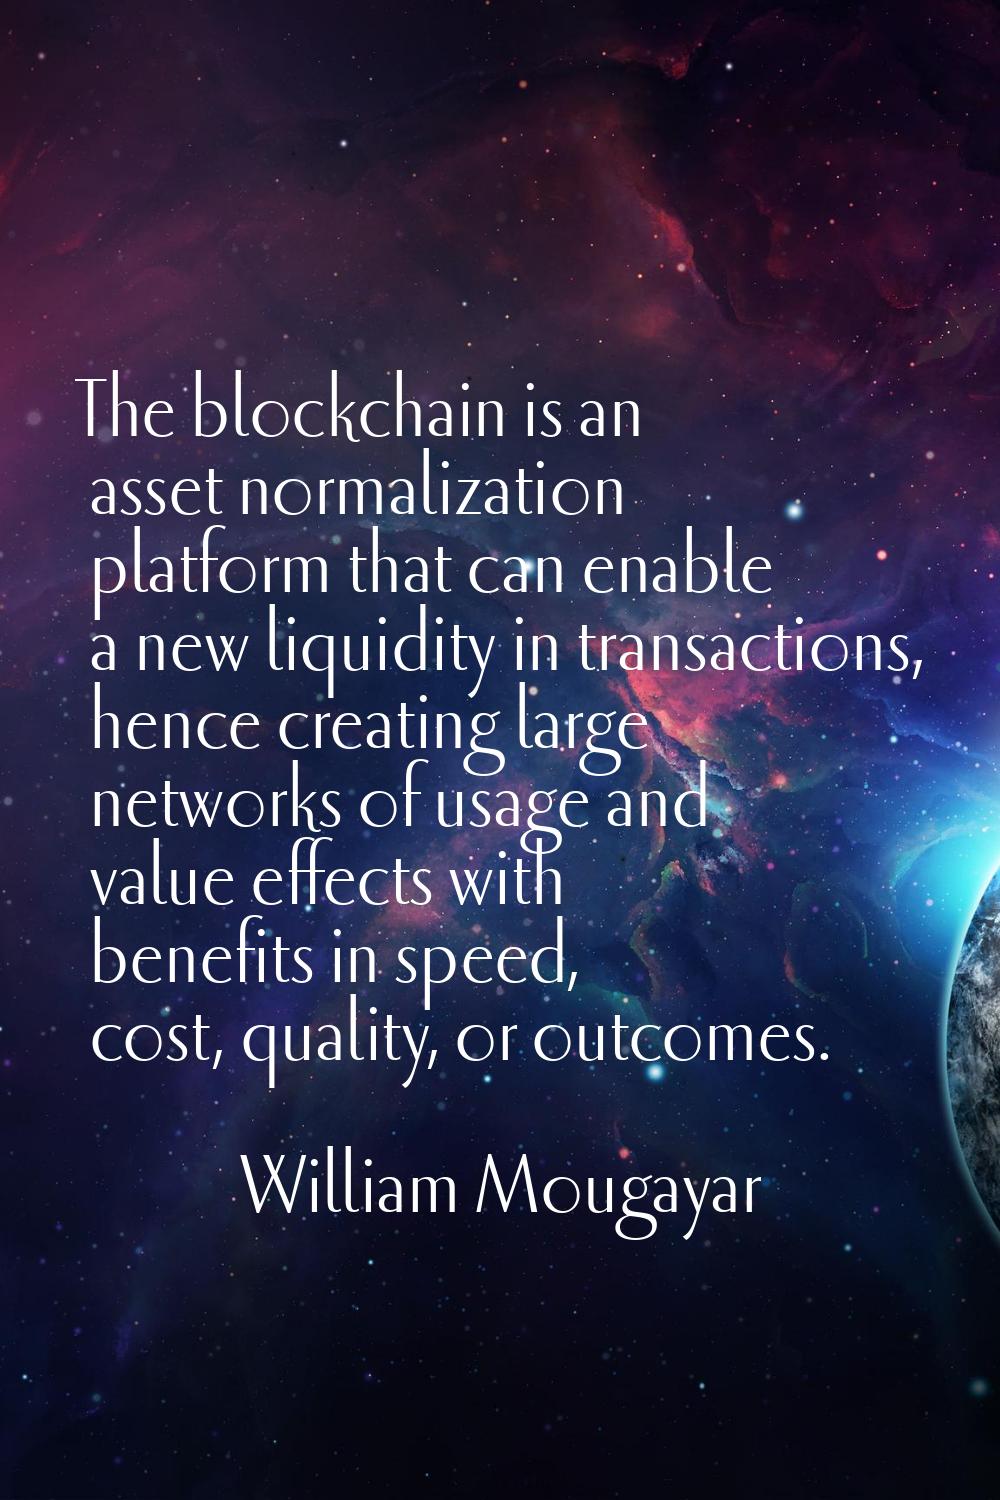 The blockchain is an asset normalization platform that can enable a new liquidity in transactions, 